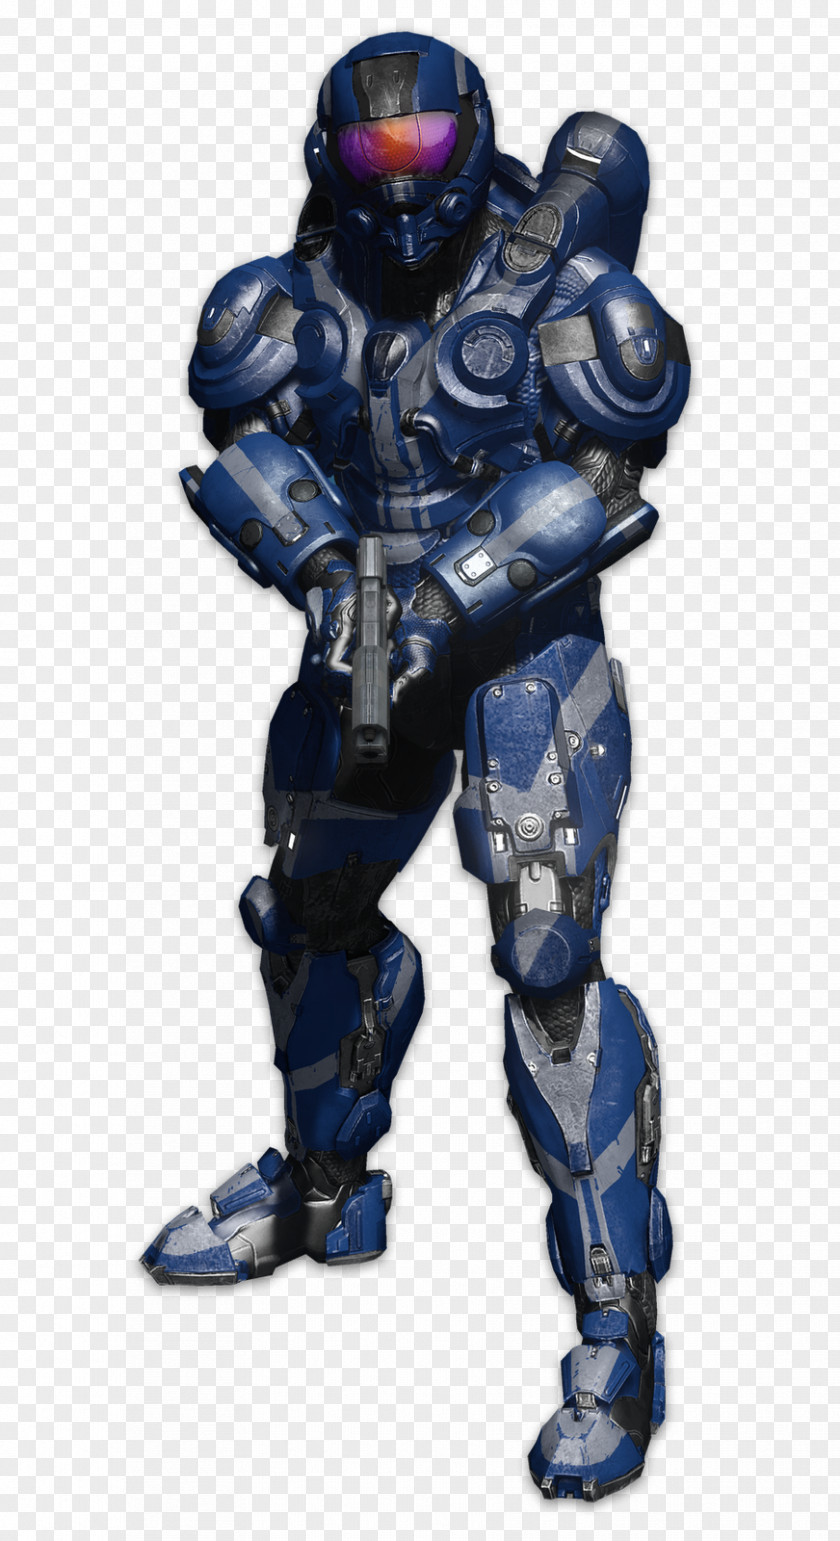 Halo 4 Halo: Reach 3: ODST Spartan Assault PNG